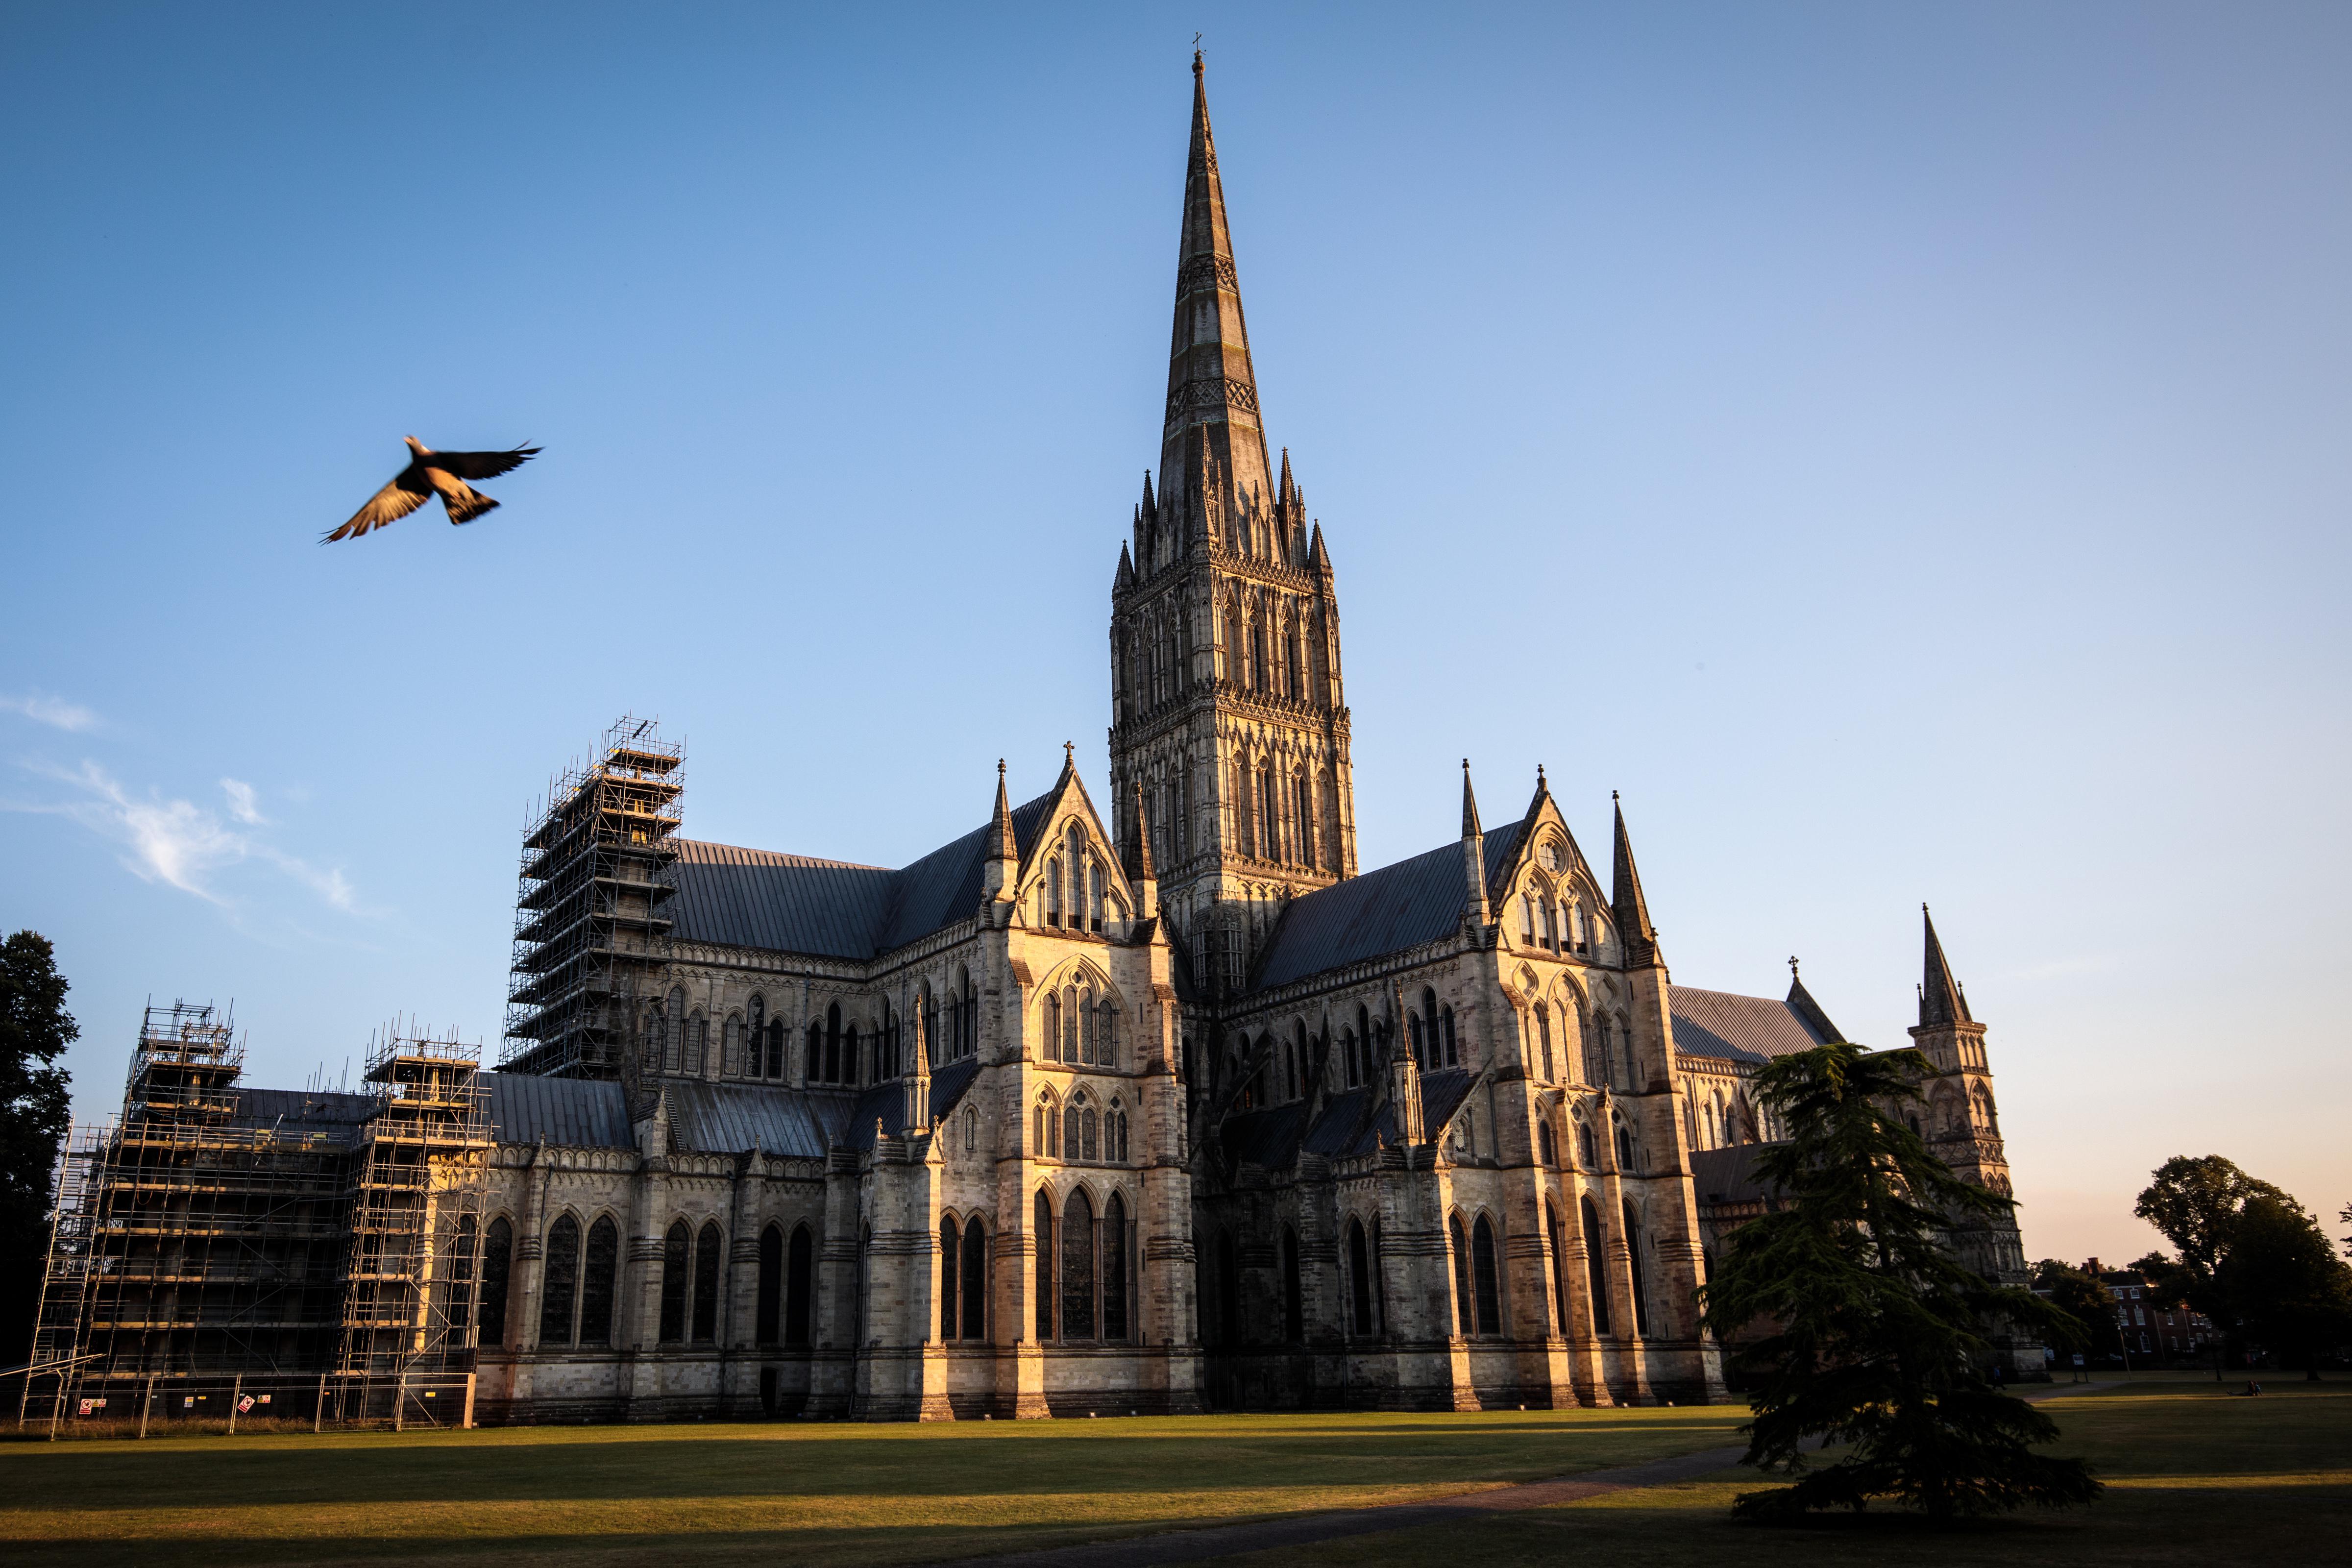 SA pigeon flies past Salisbury Cathedral as the sun sets on July 4, 2018 in Salisbury, England.